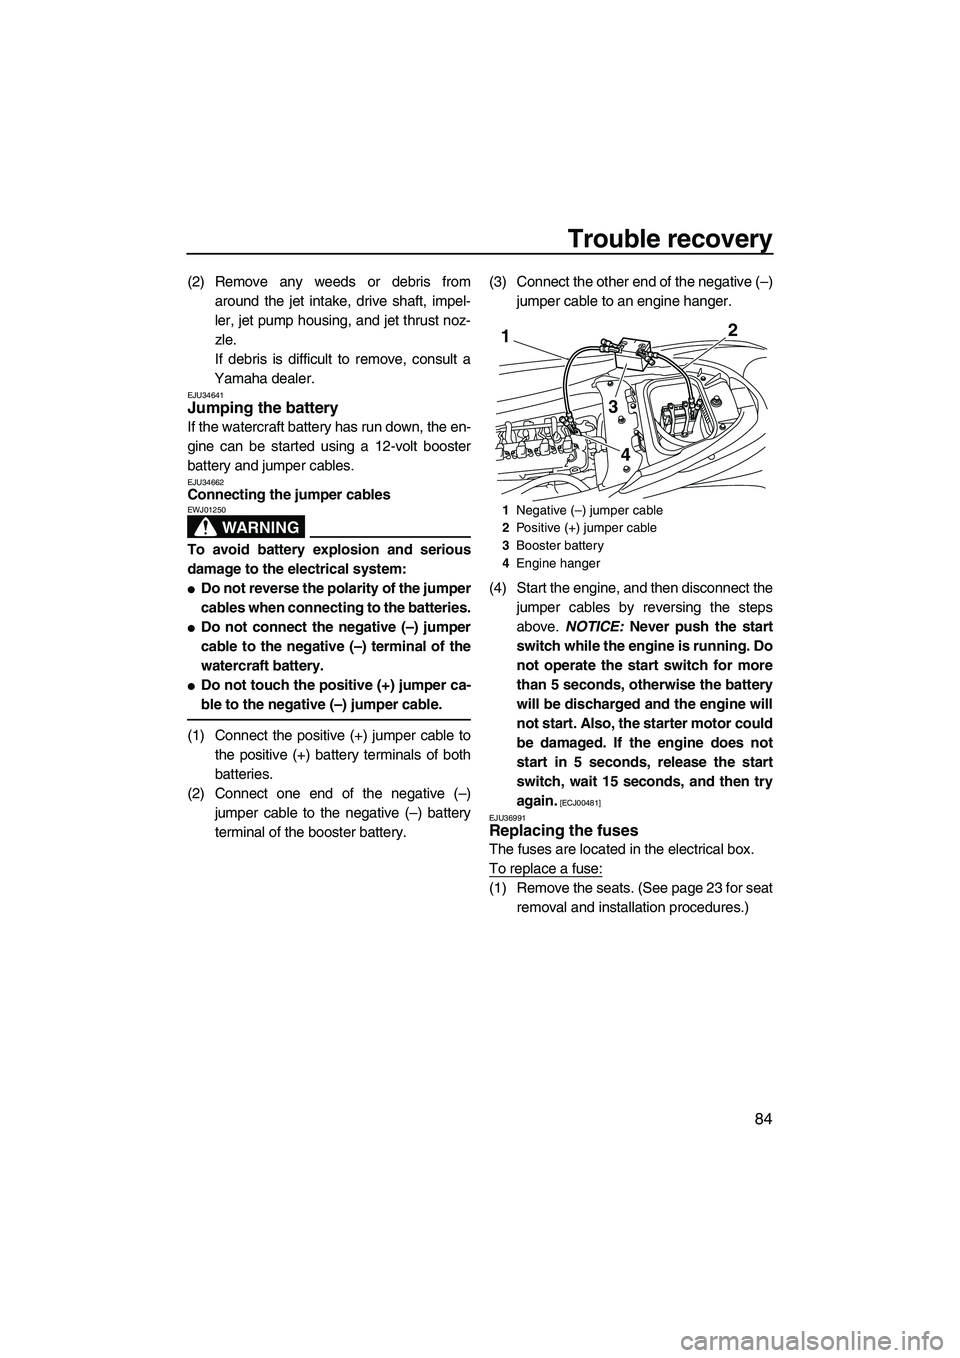 YAMAHA FZR 2009  Owners Manual Trouble recovery
84
(2) Remove any weeds or debris from
around the jet intake, drive shaft, impel-
ler, jet pump housing, and jet thrust noz-
zle.
If debris is difficult to remove, consult a
Yamaha de